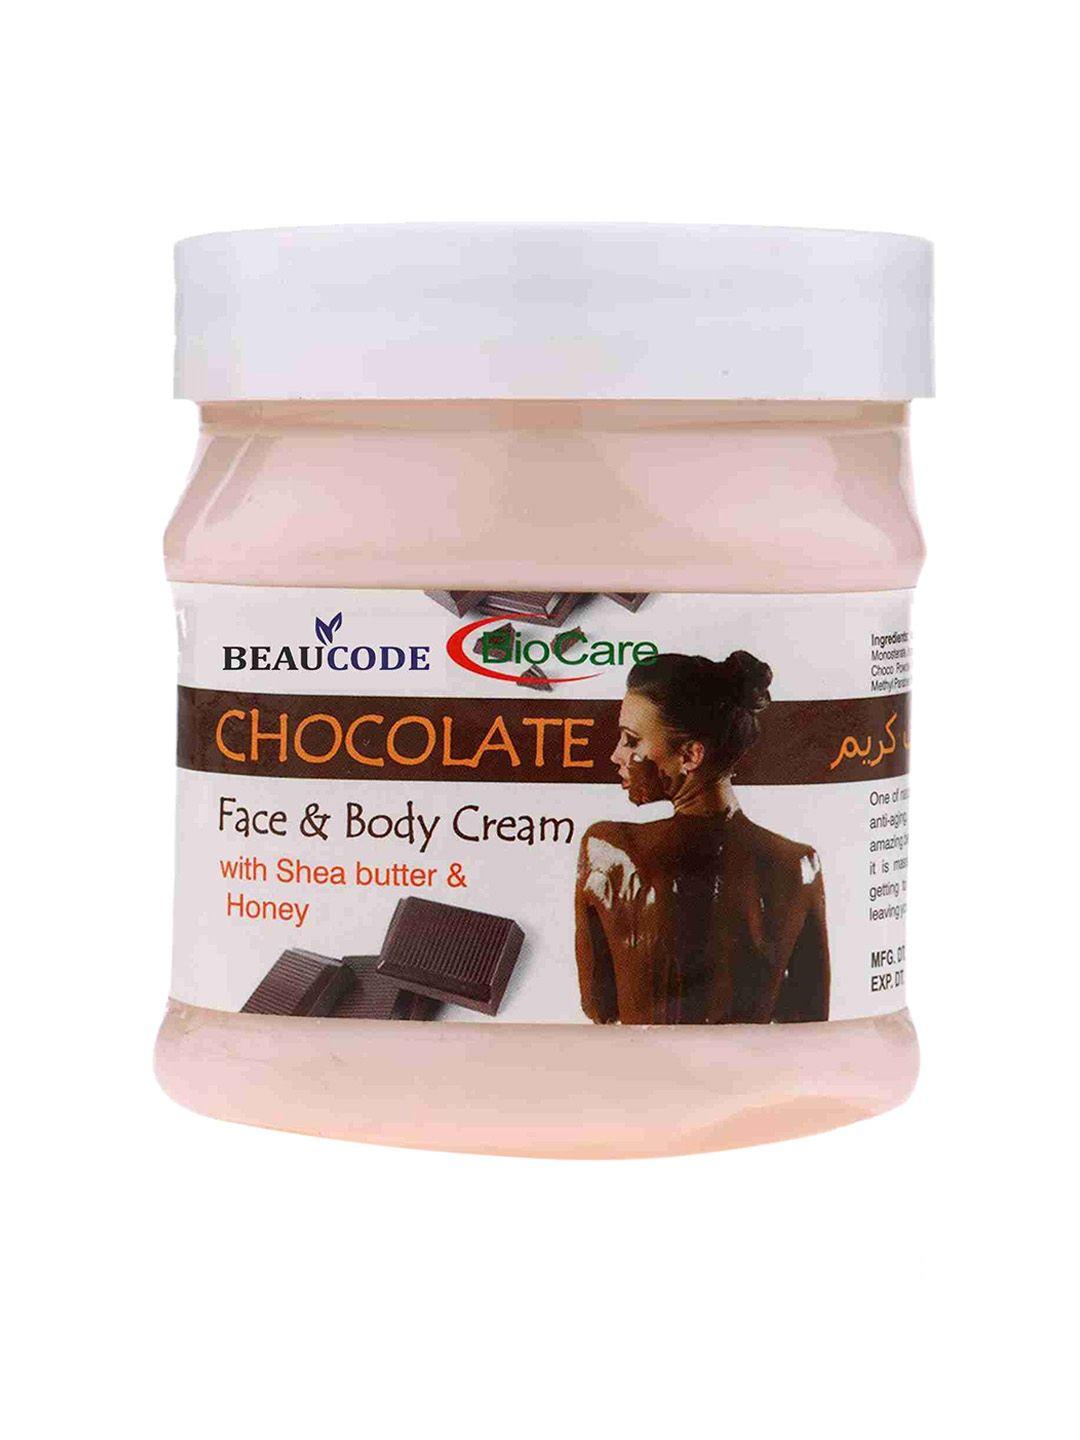 beaucode biocare chocolate face & body cream with shea butter & honey - 250 ml